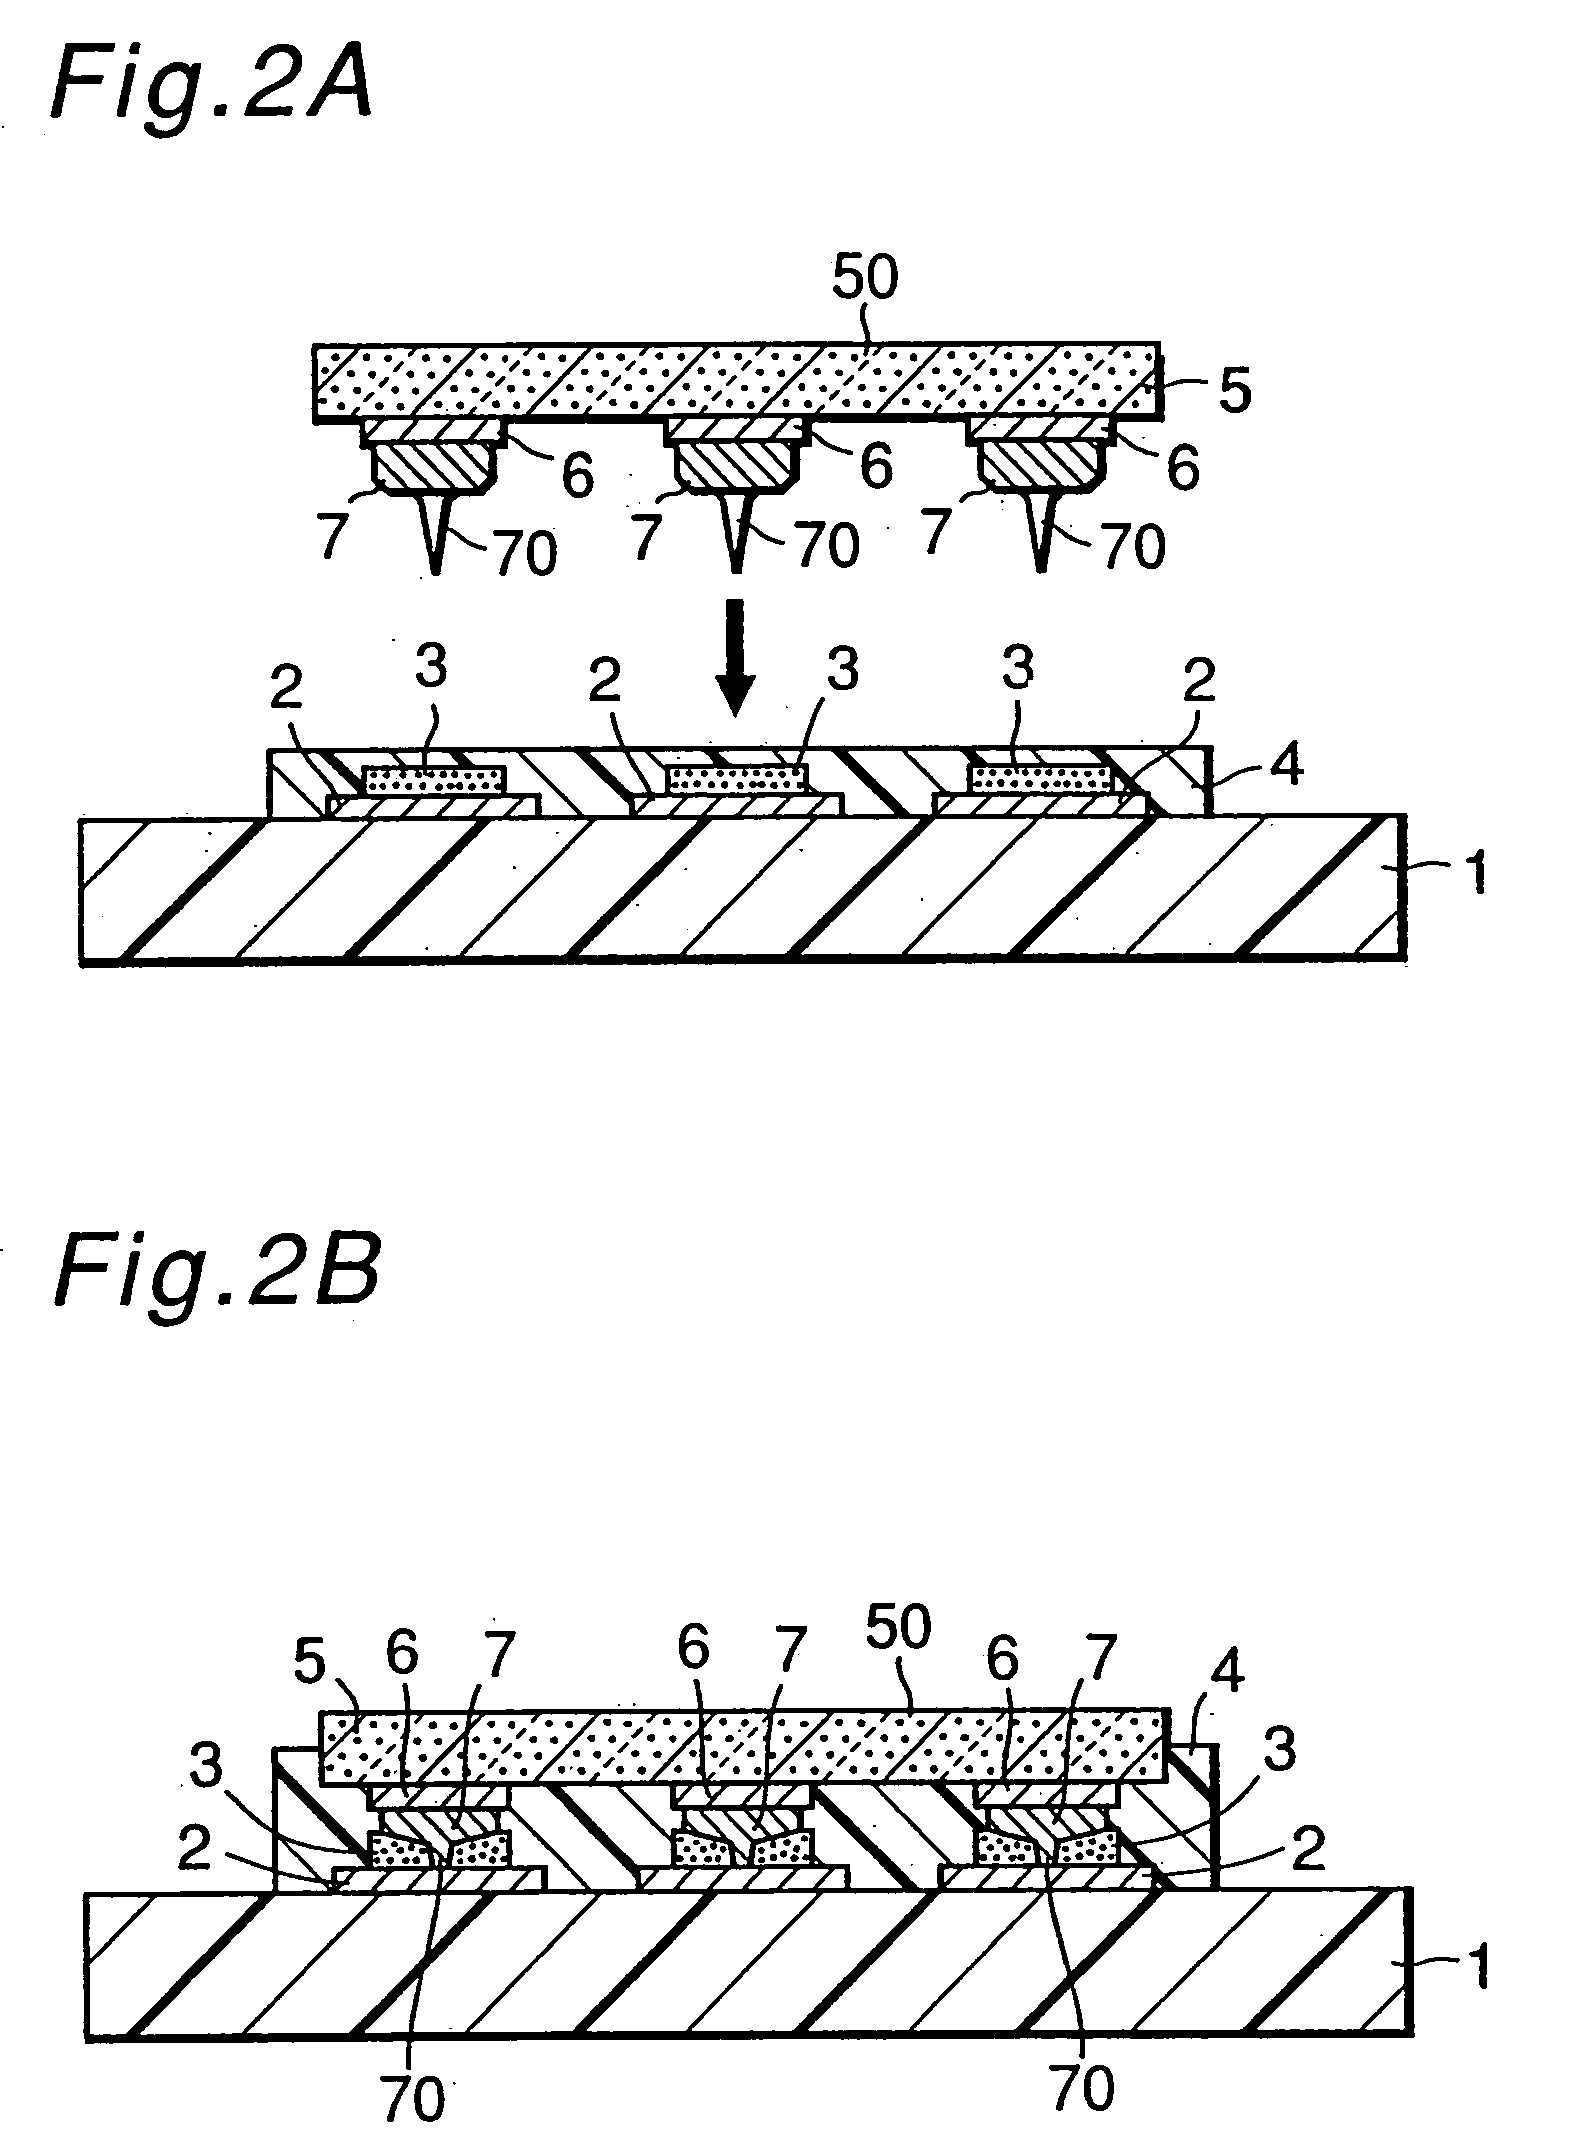 Circuit substrate for packaging semiconductor device, method for producing the same, and method for producing semiconductor device package structure using the same